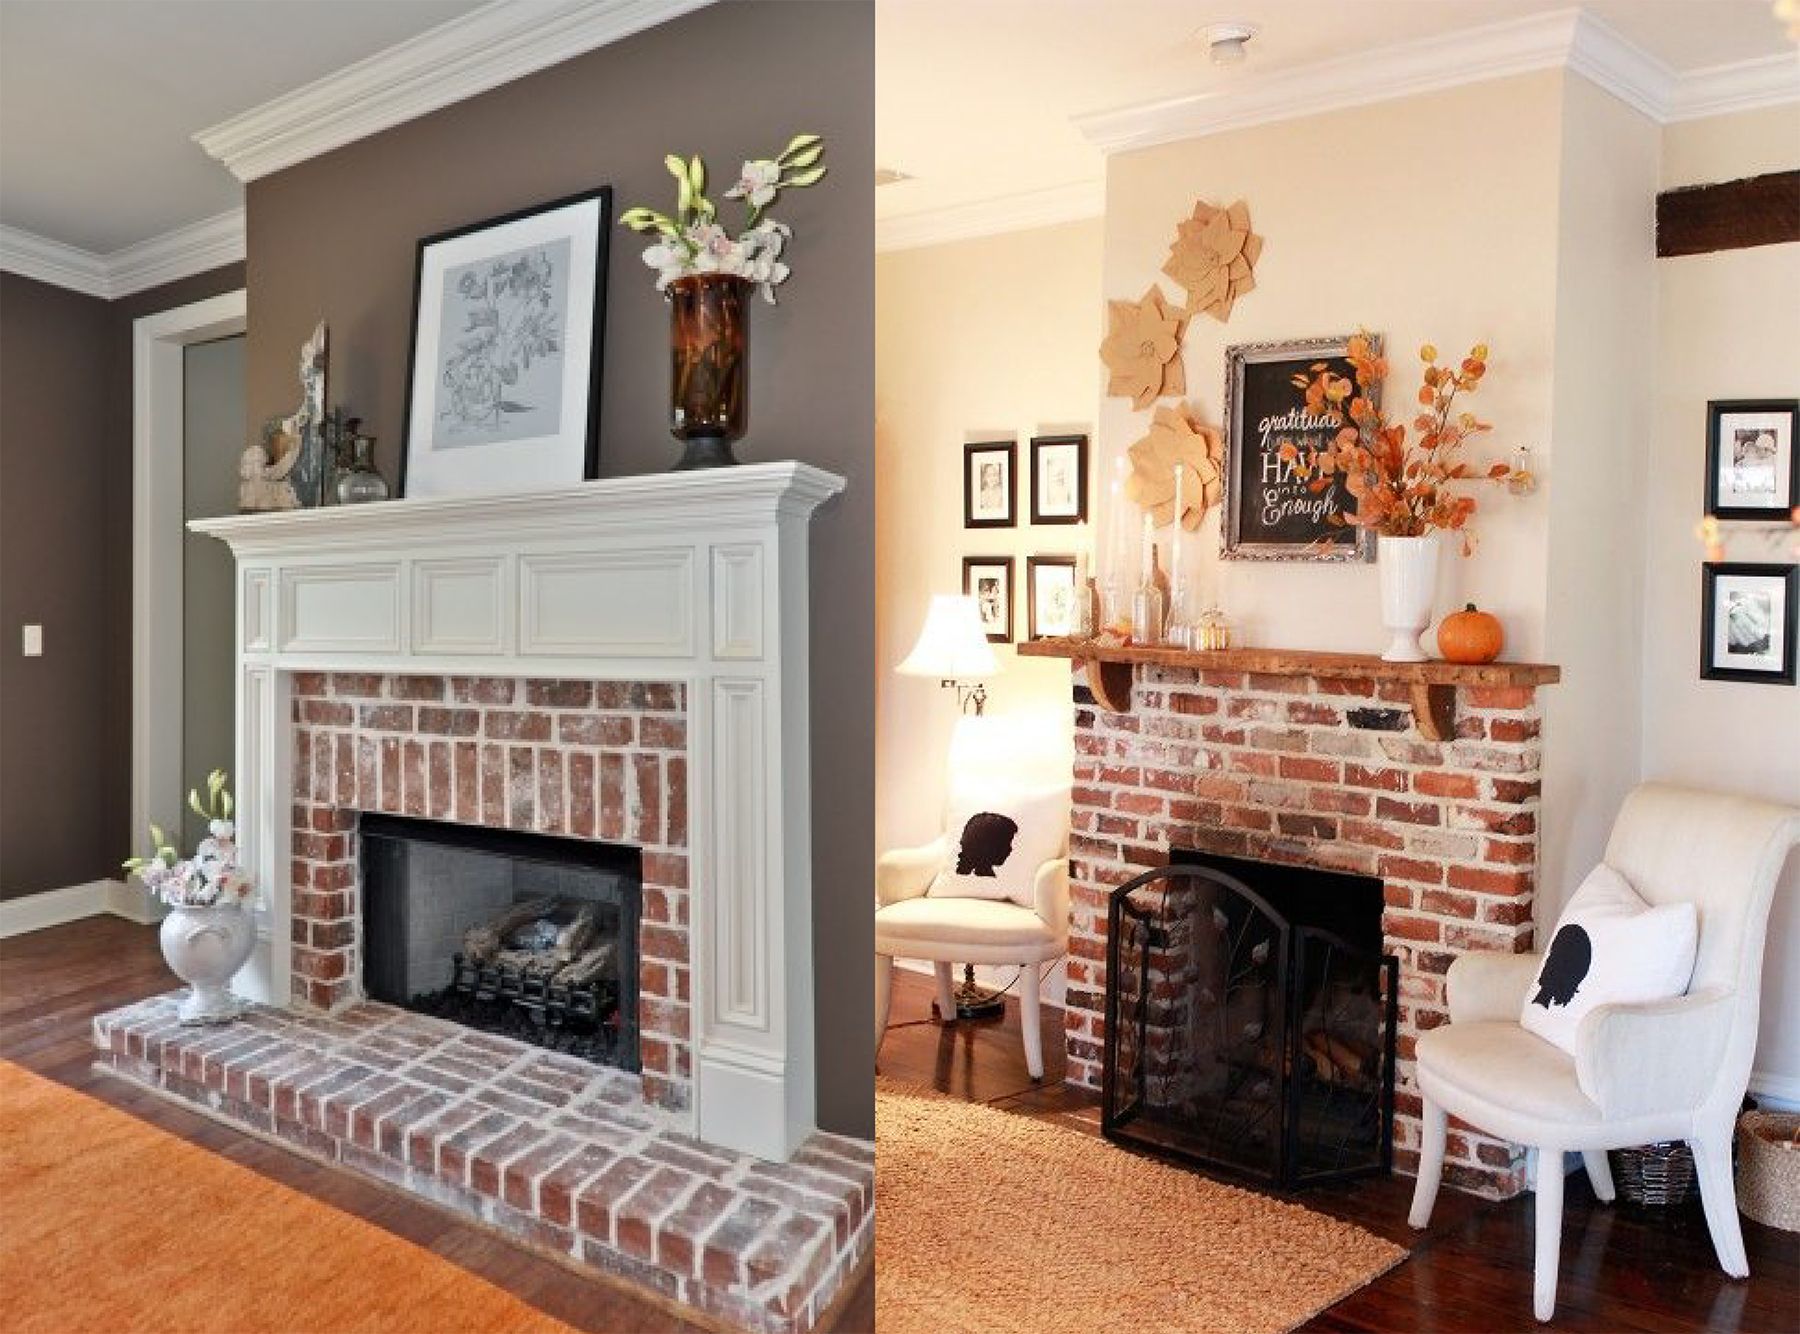 Fireplace Decorating Ideas Fresh Exposed Brick Fireplace Almond Home In 2019